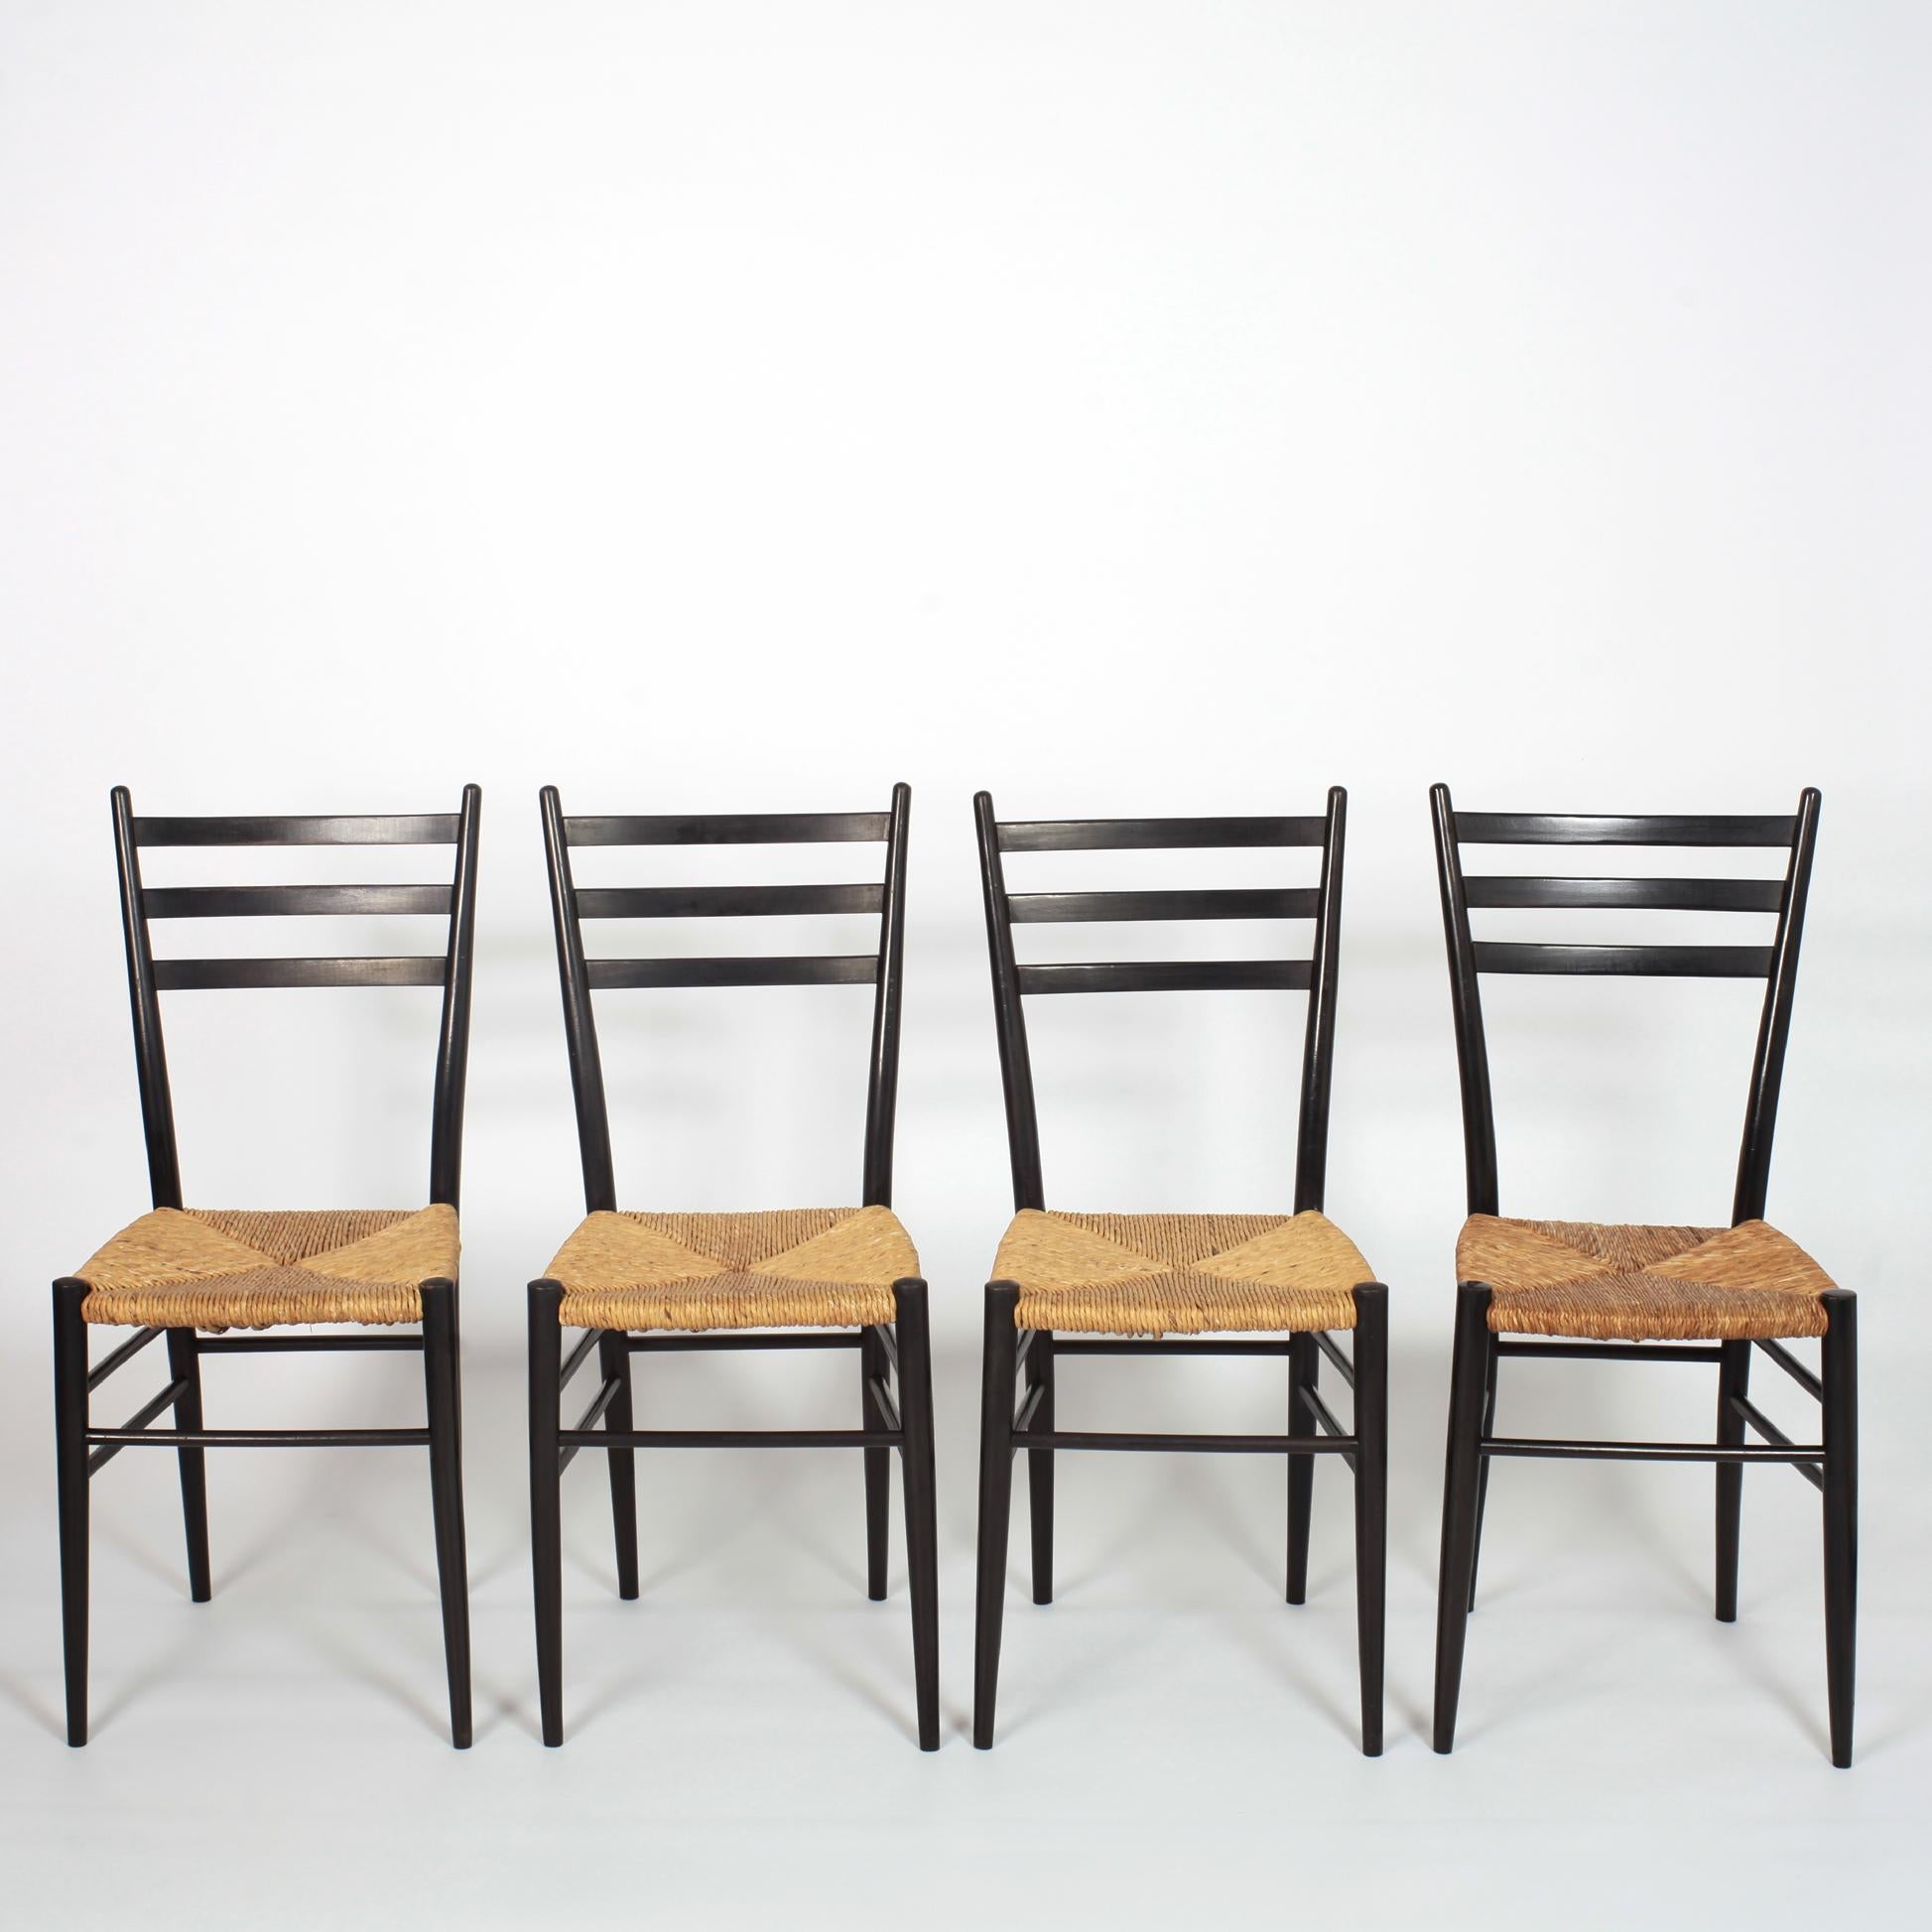 Elegant set of 8 black wood and straw Italian chairs from the 1960s.
Very good condition and nice patina.